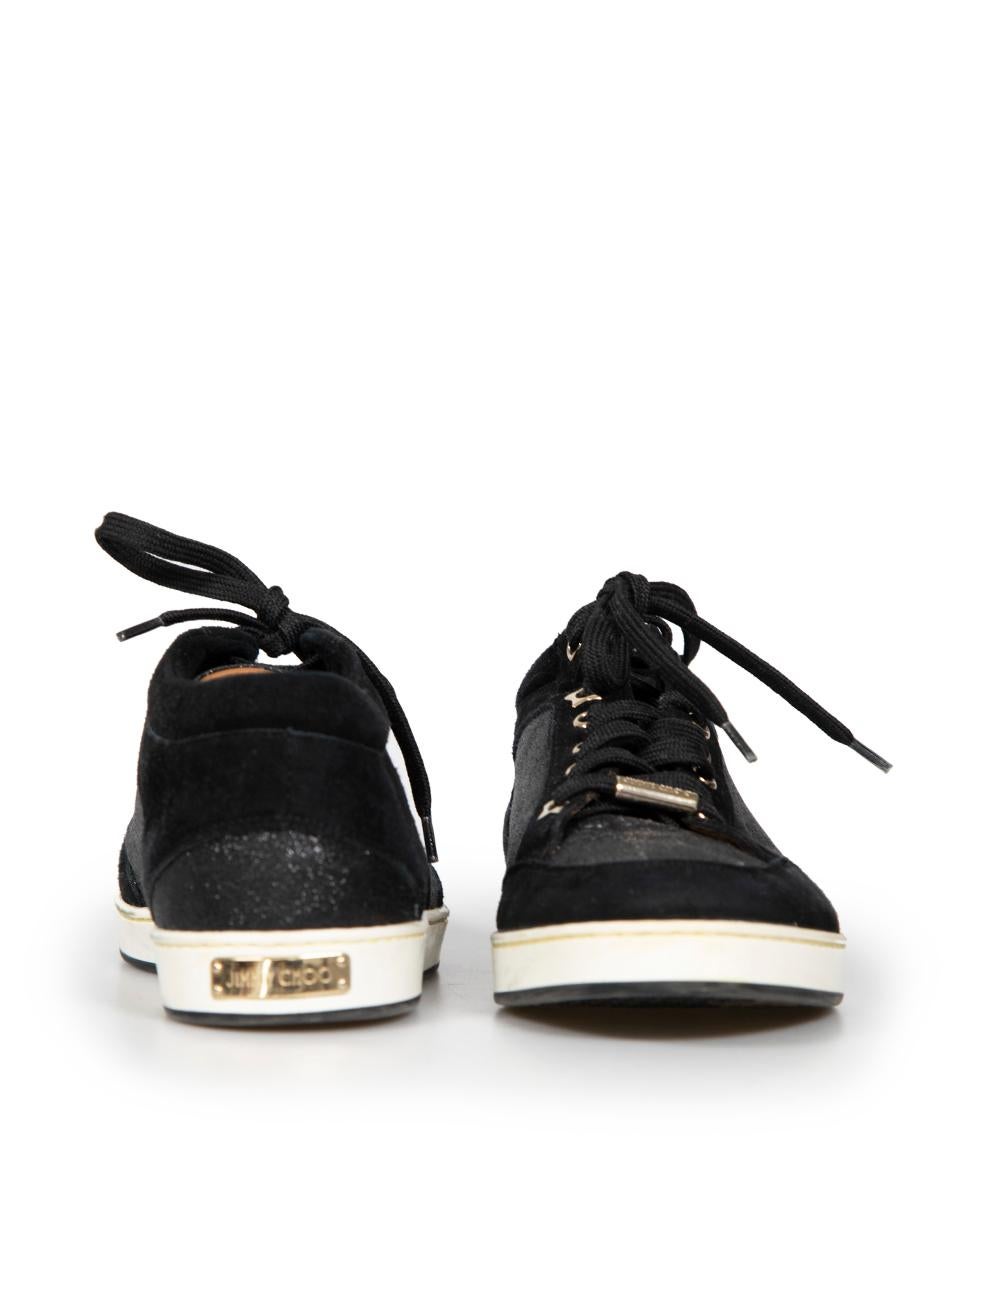 Jimmy Choo Black Glitter Miami Trainers Size IT 36 In Good Condition For Sale In London, GB